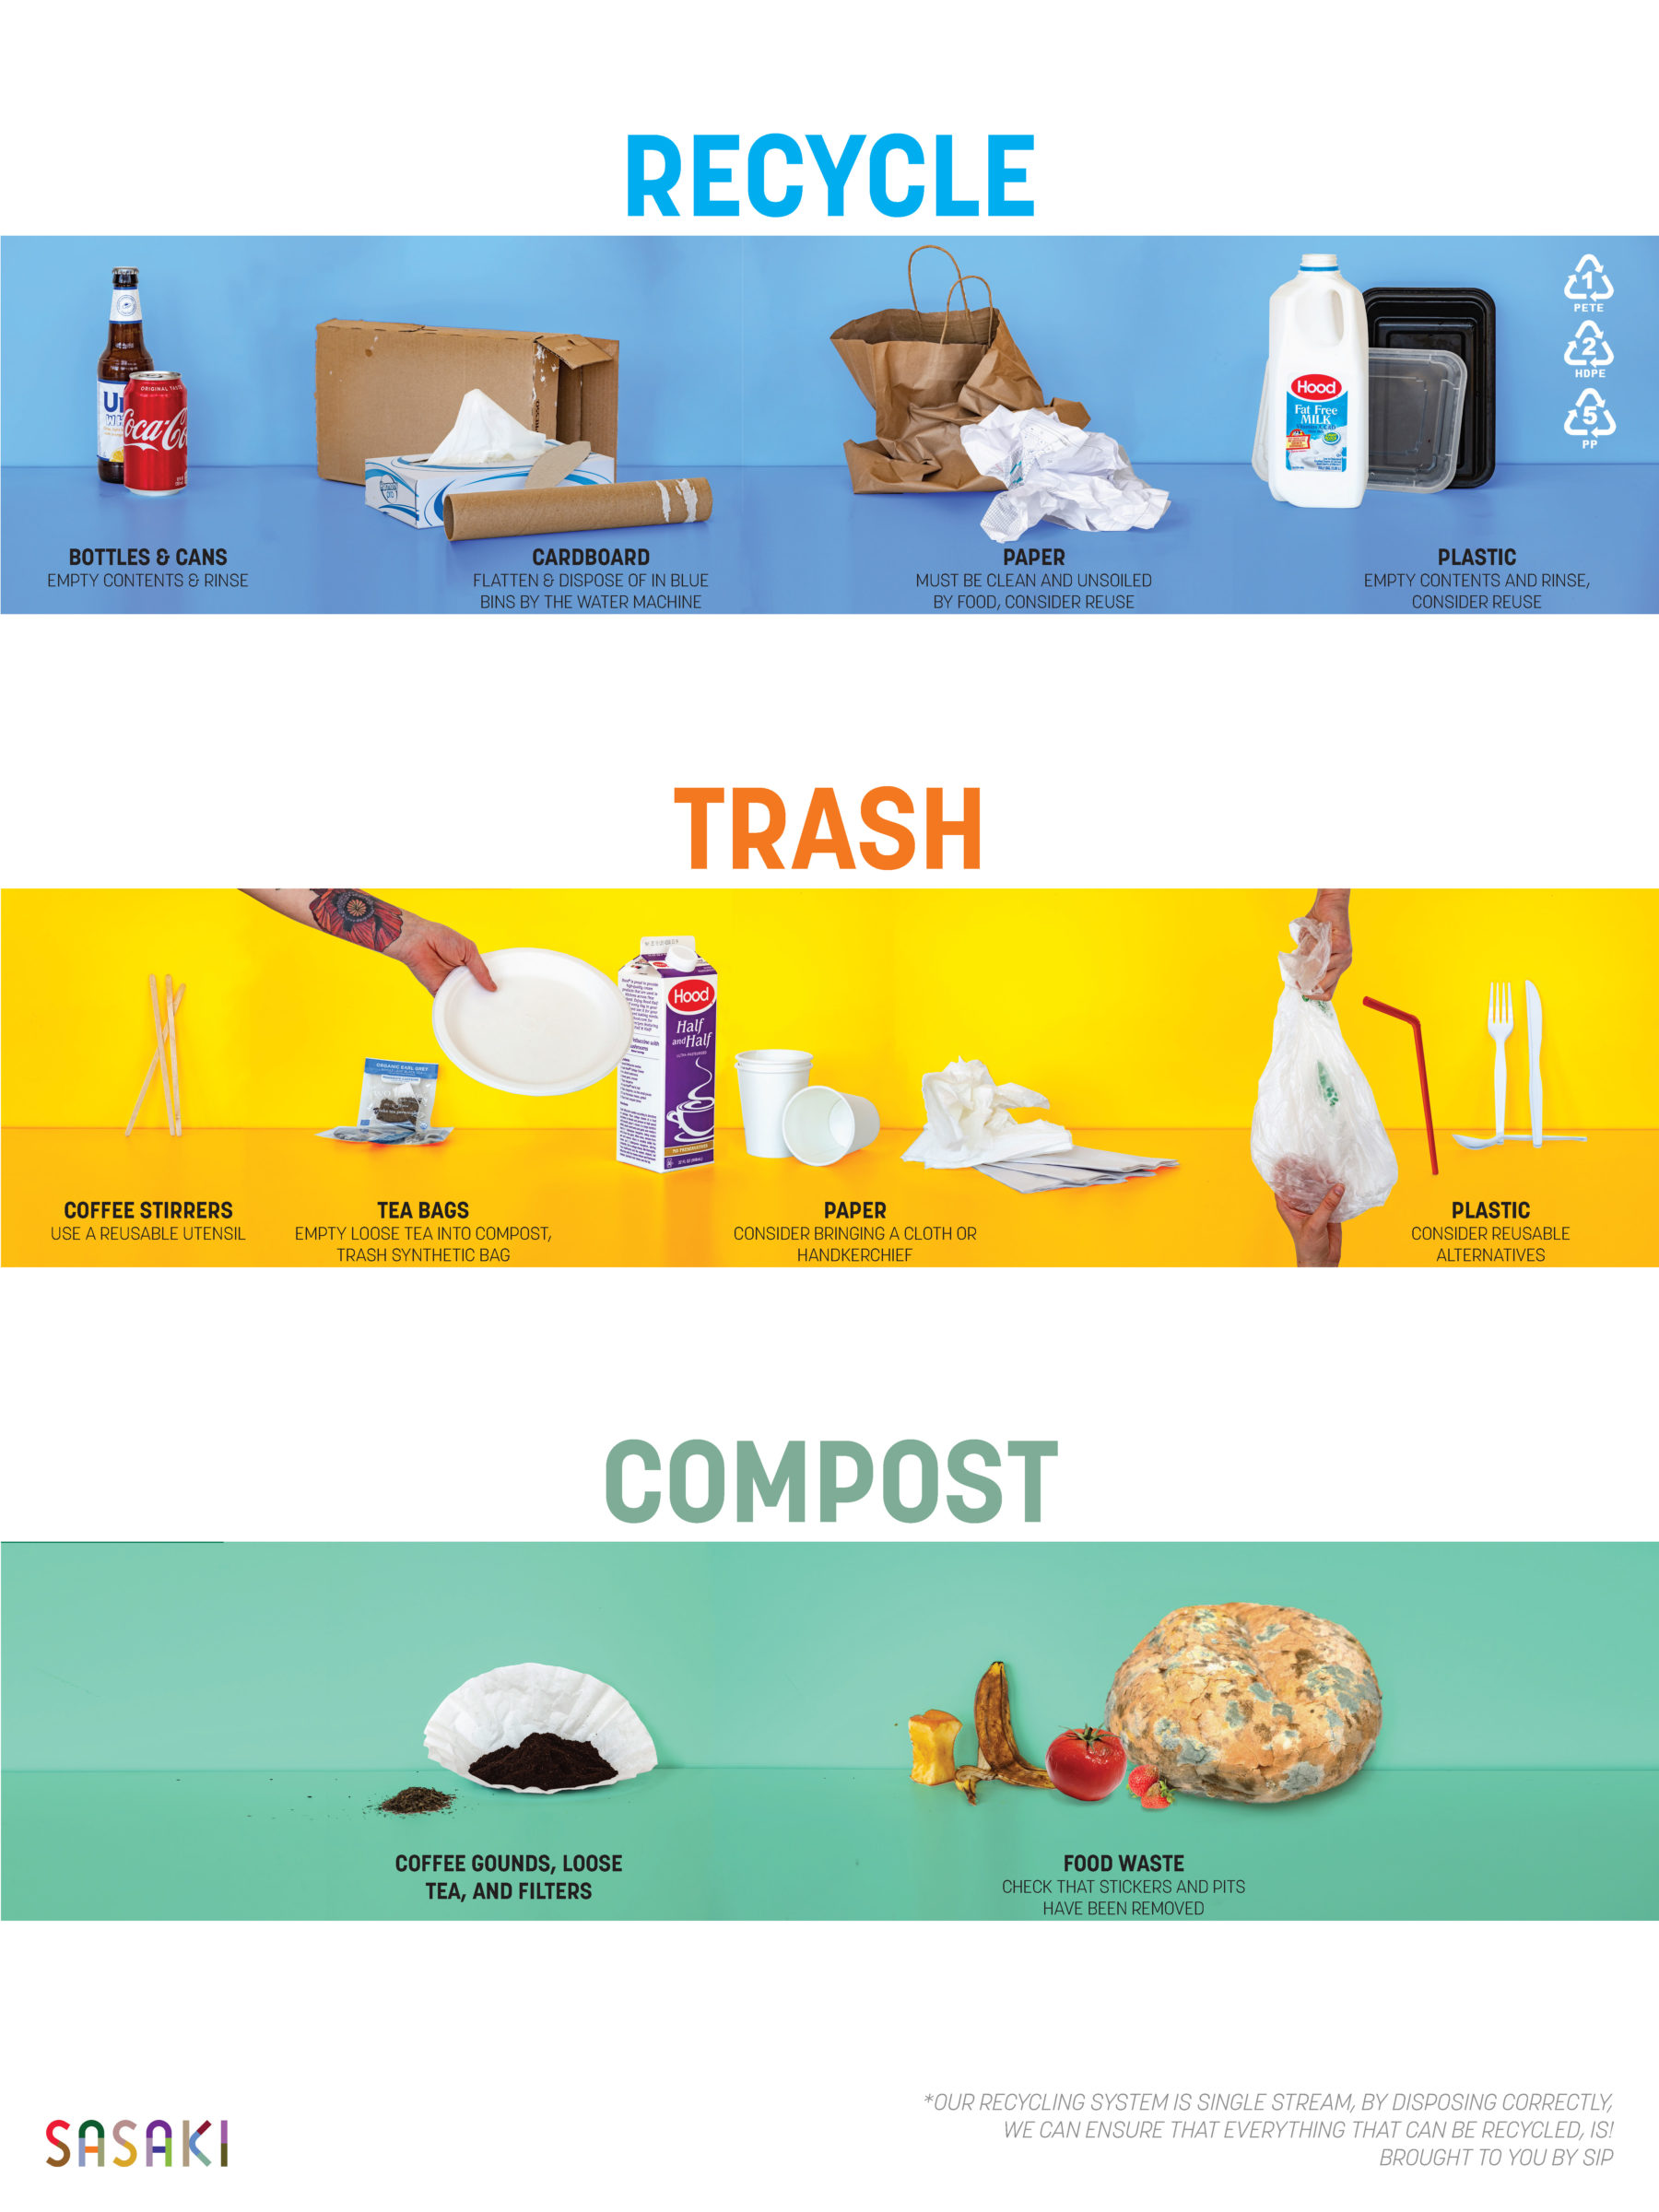 poster showing what can be recycled, thrown in the trash, and composted